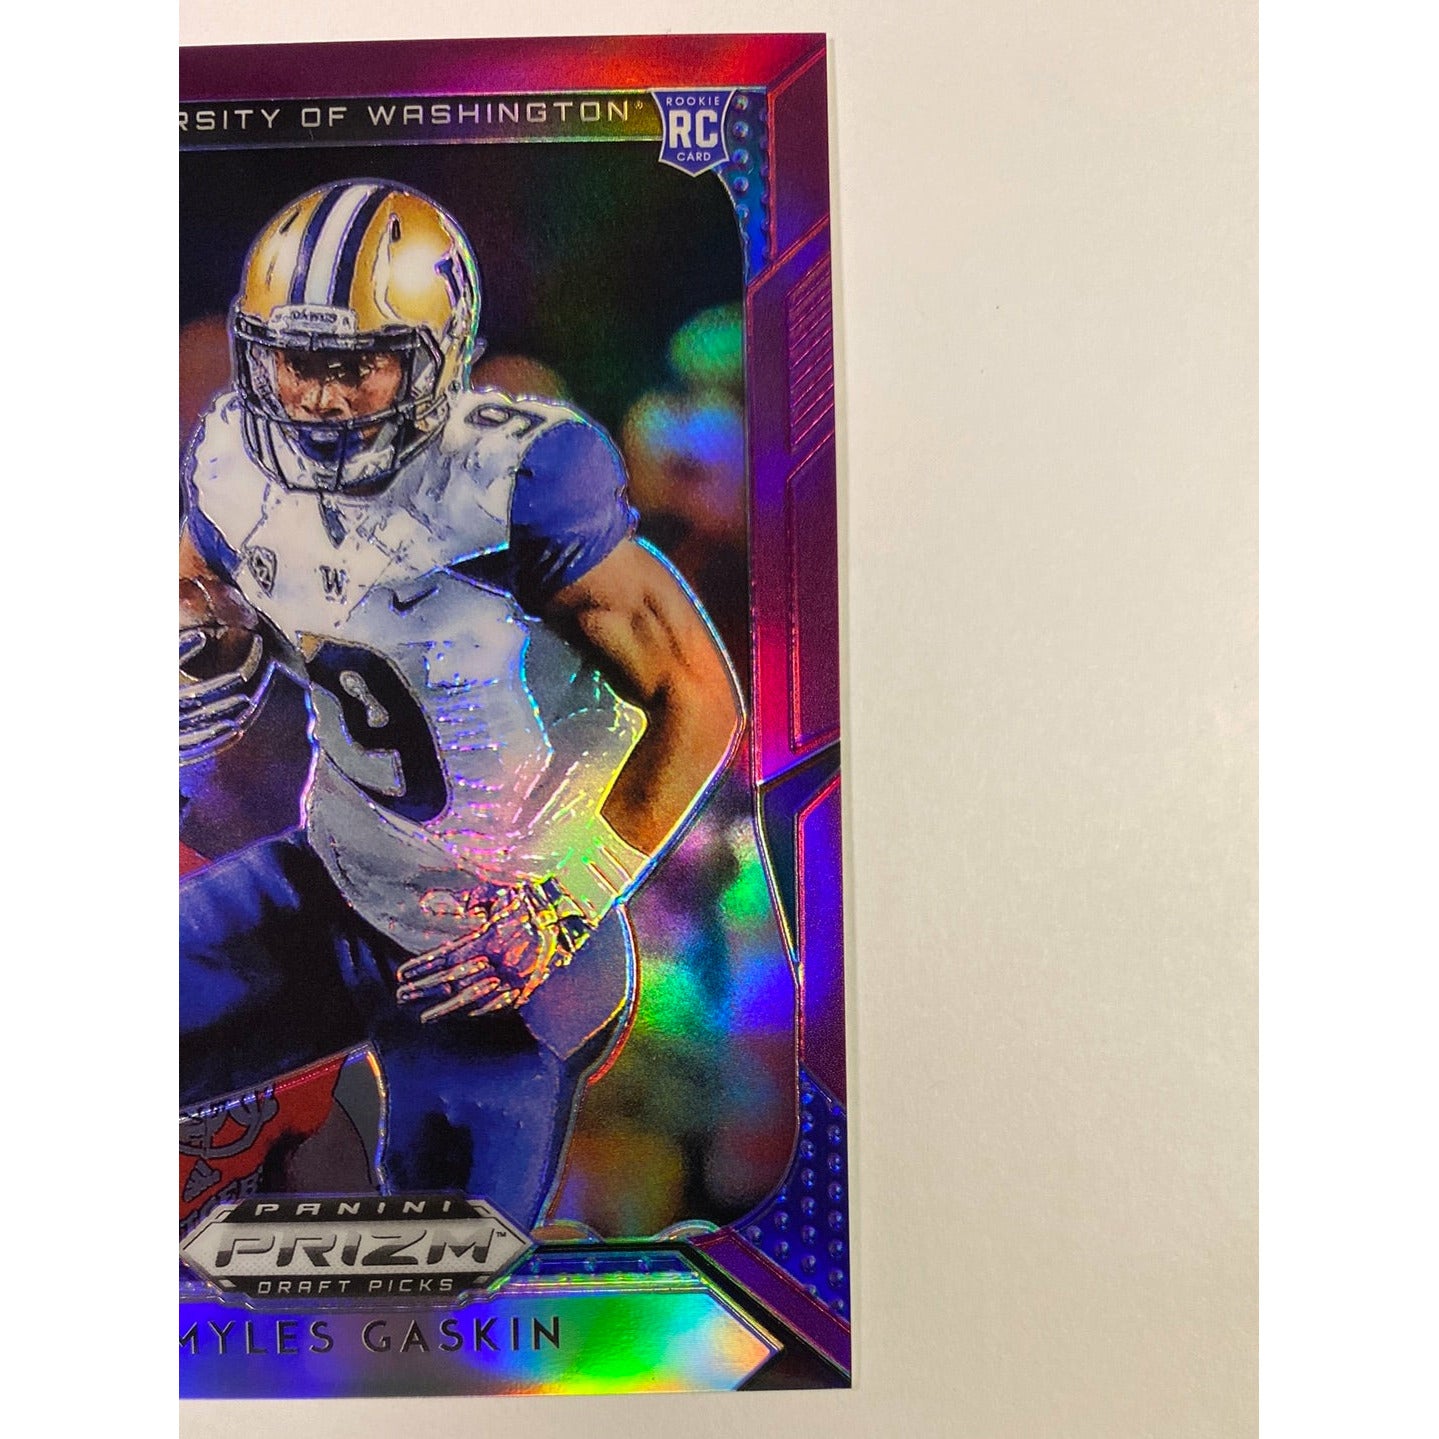  2019 Panini Prizm Draft Picks Myles Gaskin Pink Prizm RC  Local Legends Cards & Collectibles